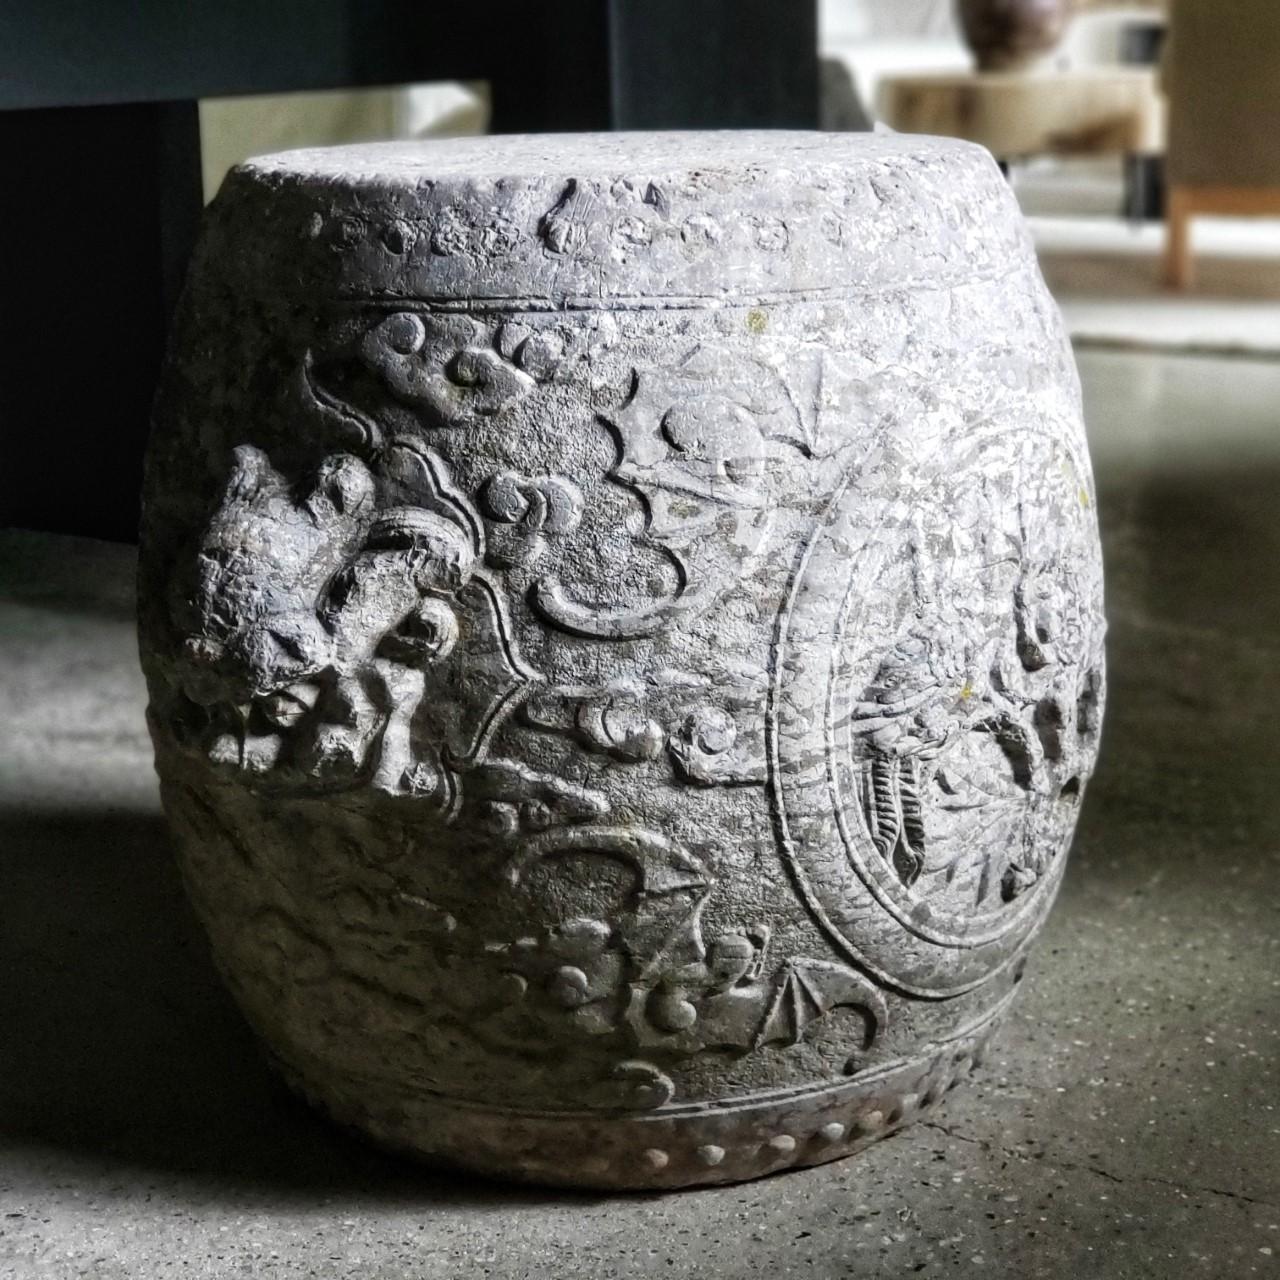 - Sold individually or as a pair -

17th Century Ming Dynasty carved stone barrel, with Foo Dog handles, floral reliefs and bat wing decoration. The Chinese symbol for bat and for good luck is the same, thus the use of bats for symbolism.

NOTES: